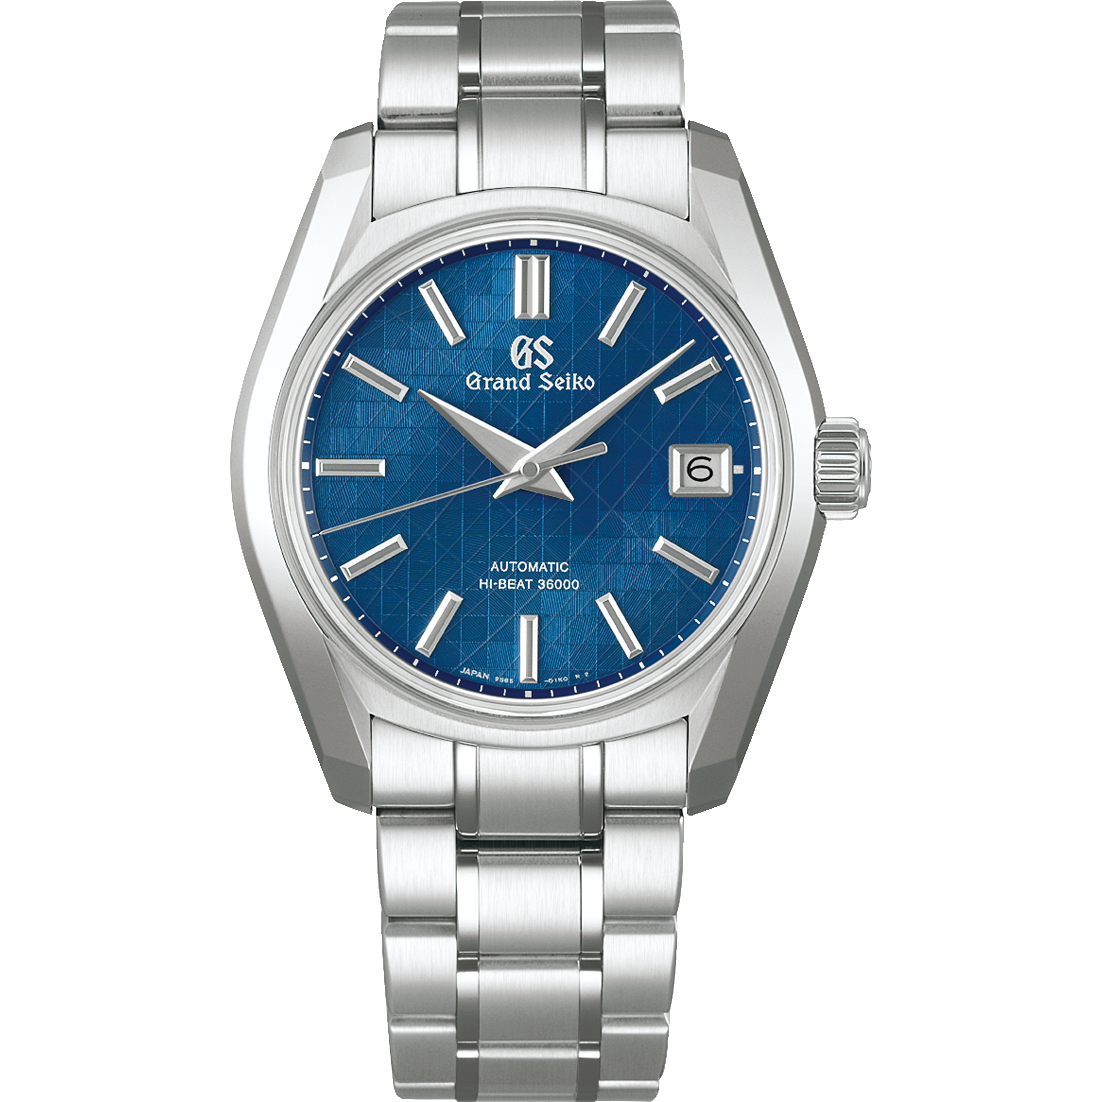 Grand Seiko Mechanical High Beat 36000 Ginza Limited 2023 Model  SBGH315 watch 2023.7.15released